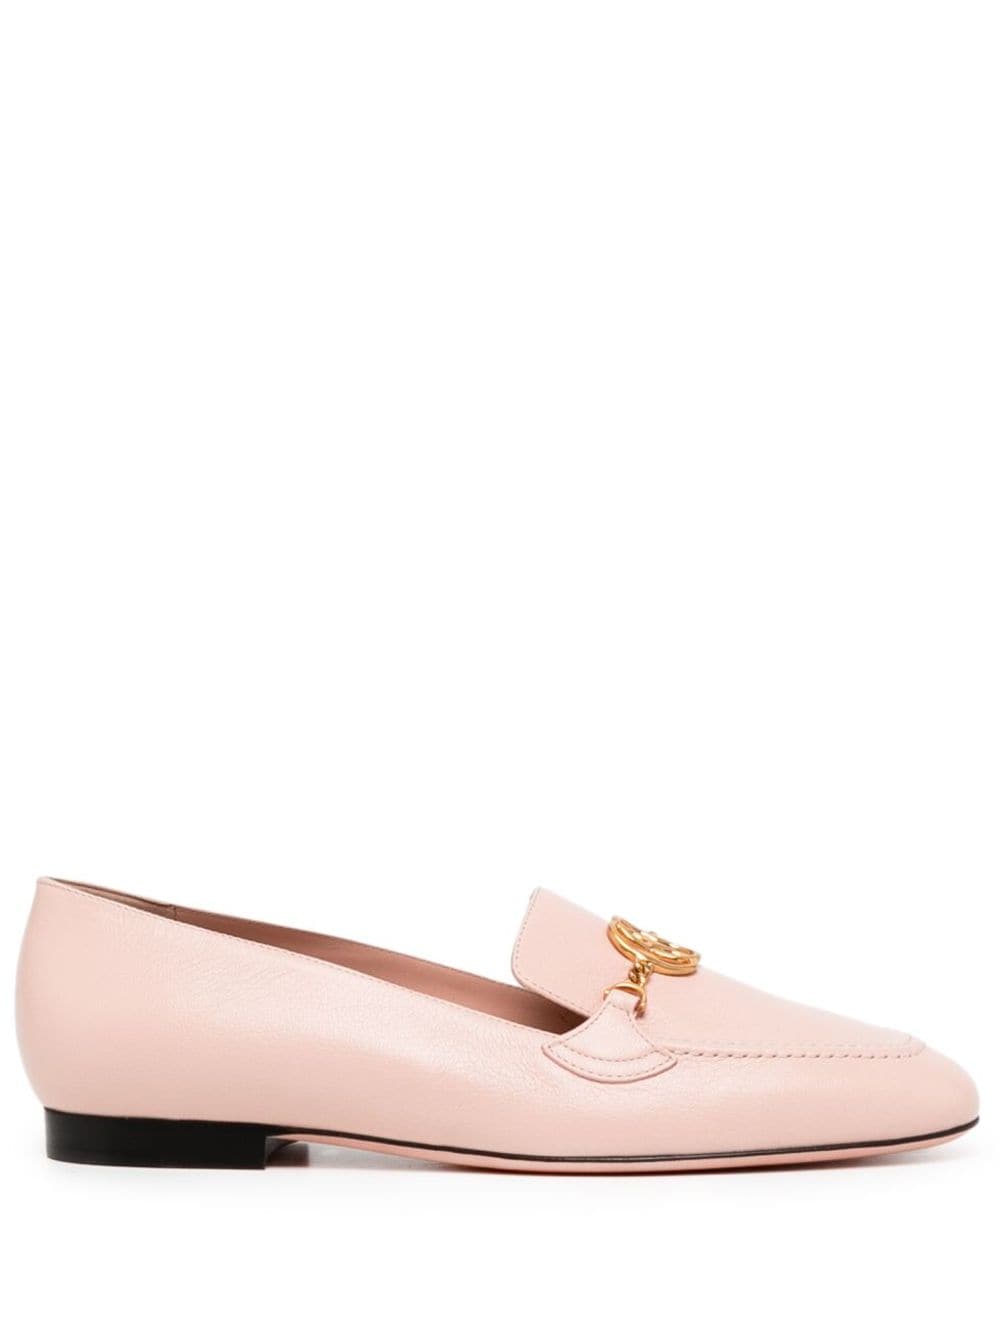 Bally Obrien embellished leather loafers - Pink von Bally